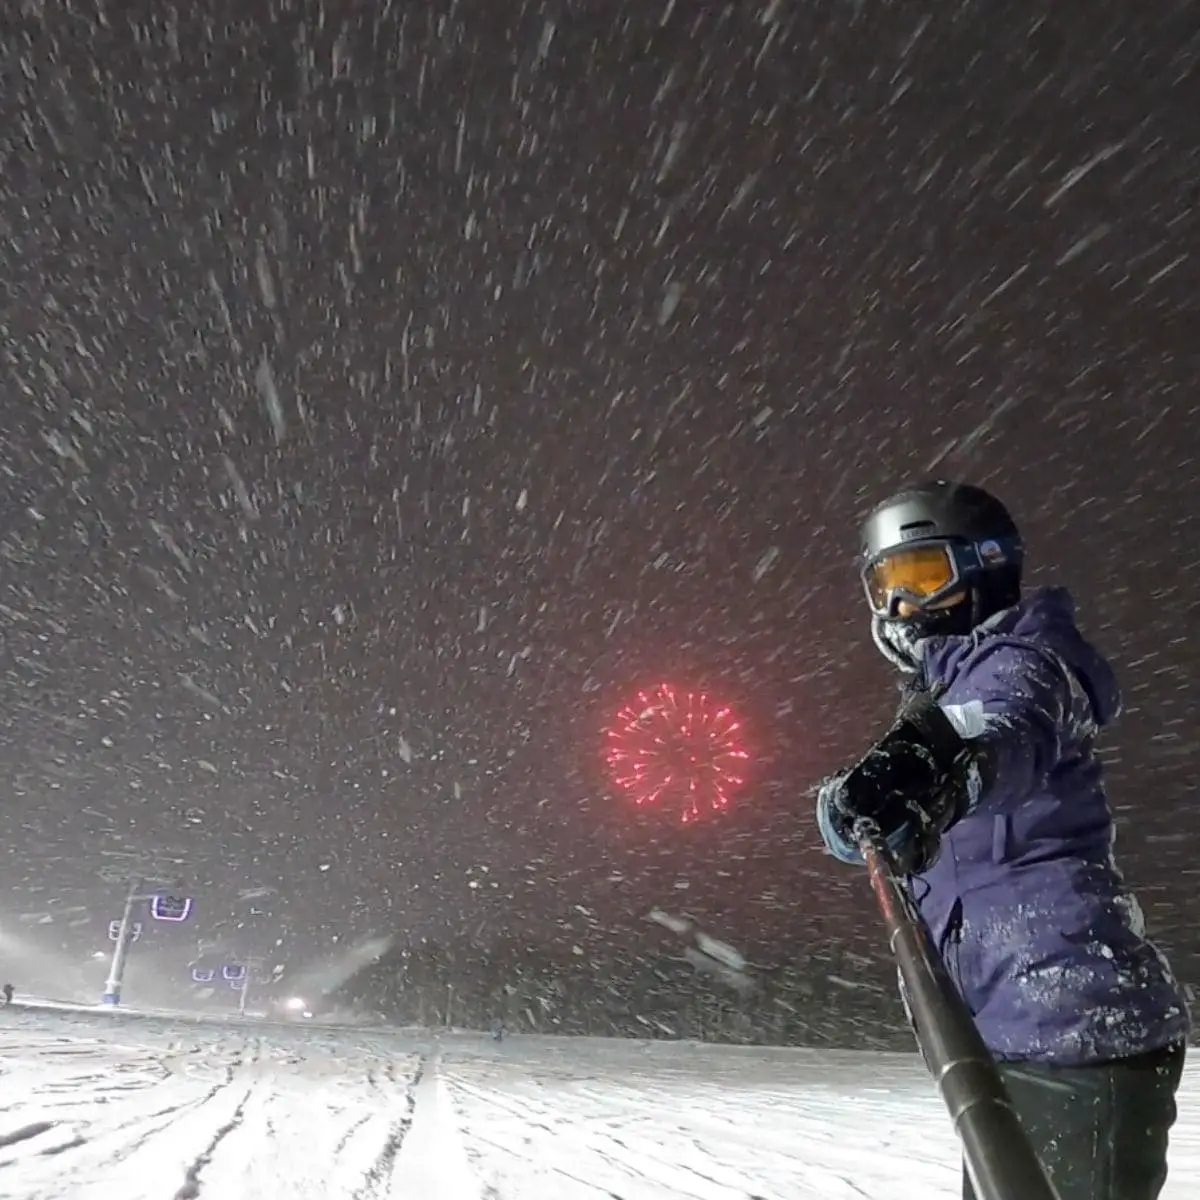 Fireworks while snowboarding at night